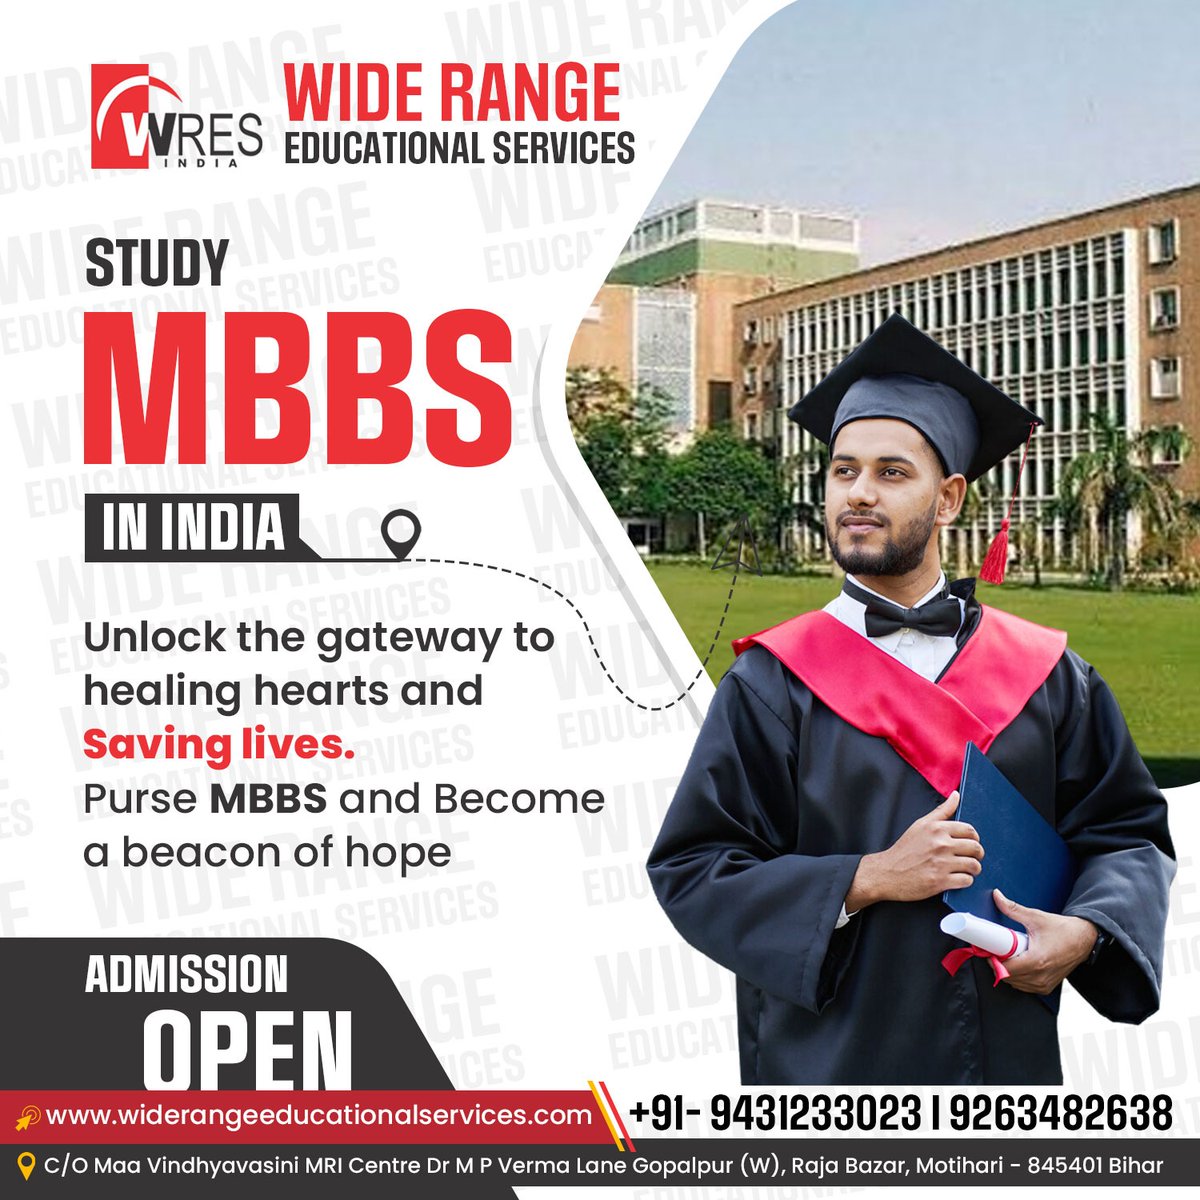 Ready to pursue your dream of studying MBBS in India? With Wide Range Educational Services by your side, your aspirations become possibilities!  
#widerange #educationalconsultancy #MBBSinIndia #EducationalServices #WideRangeEducation #BuildYourFuture #WideRangeConsultancy